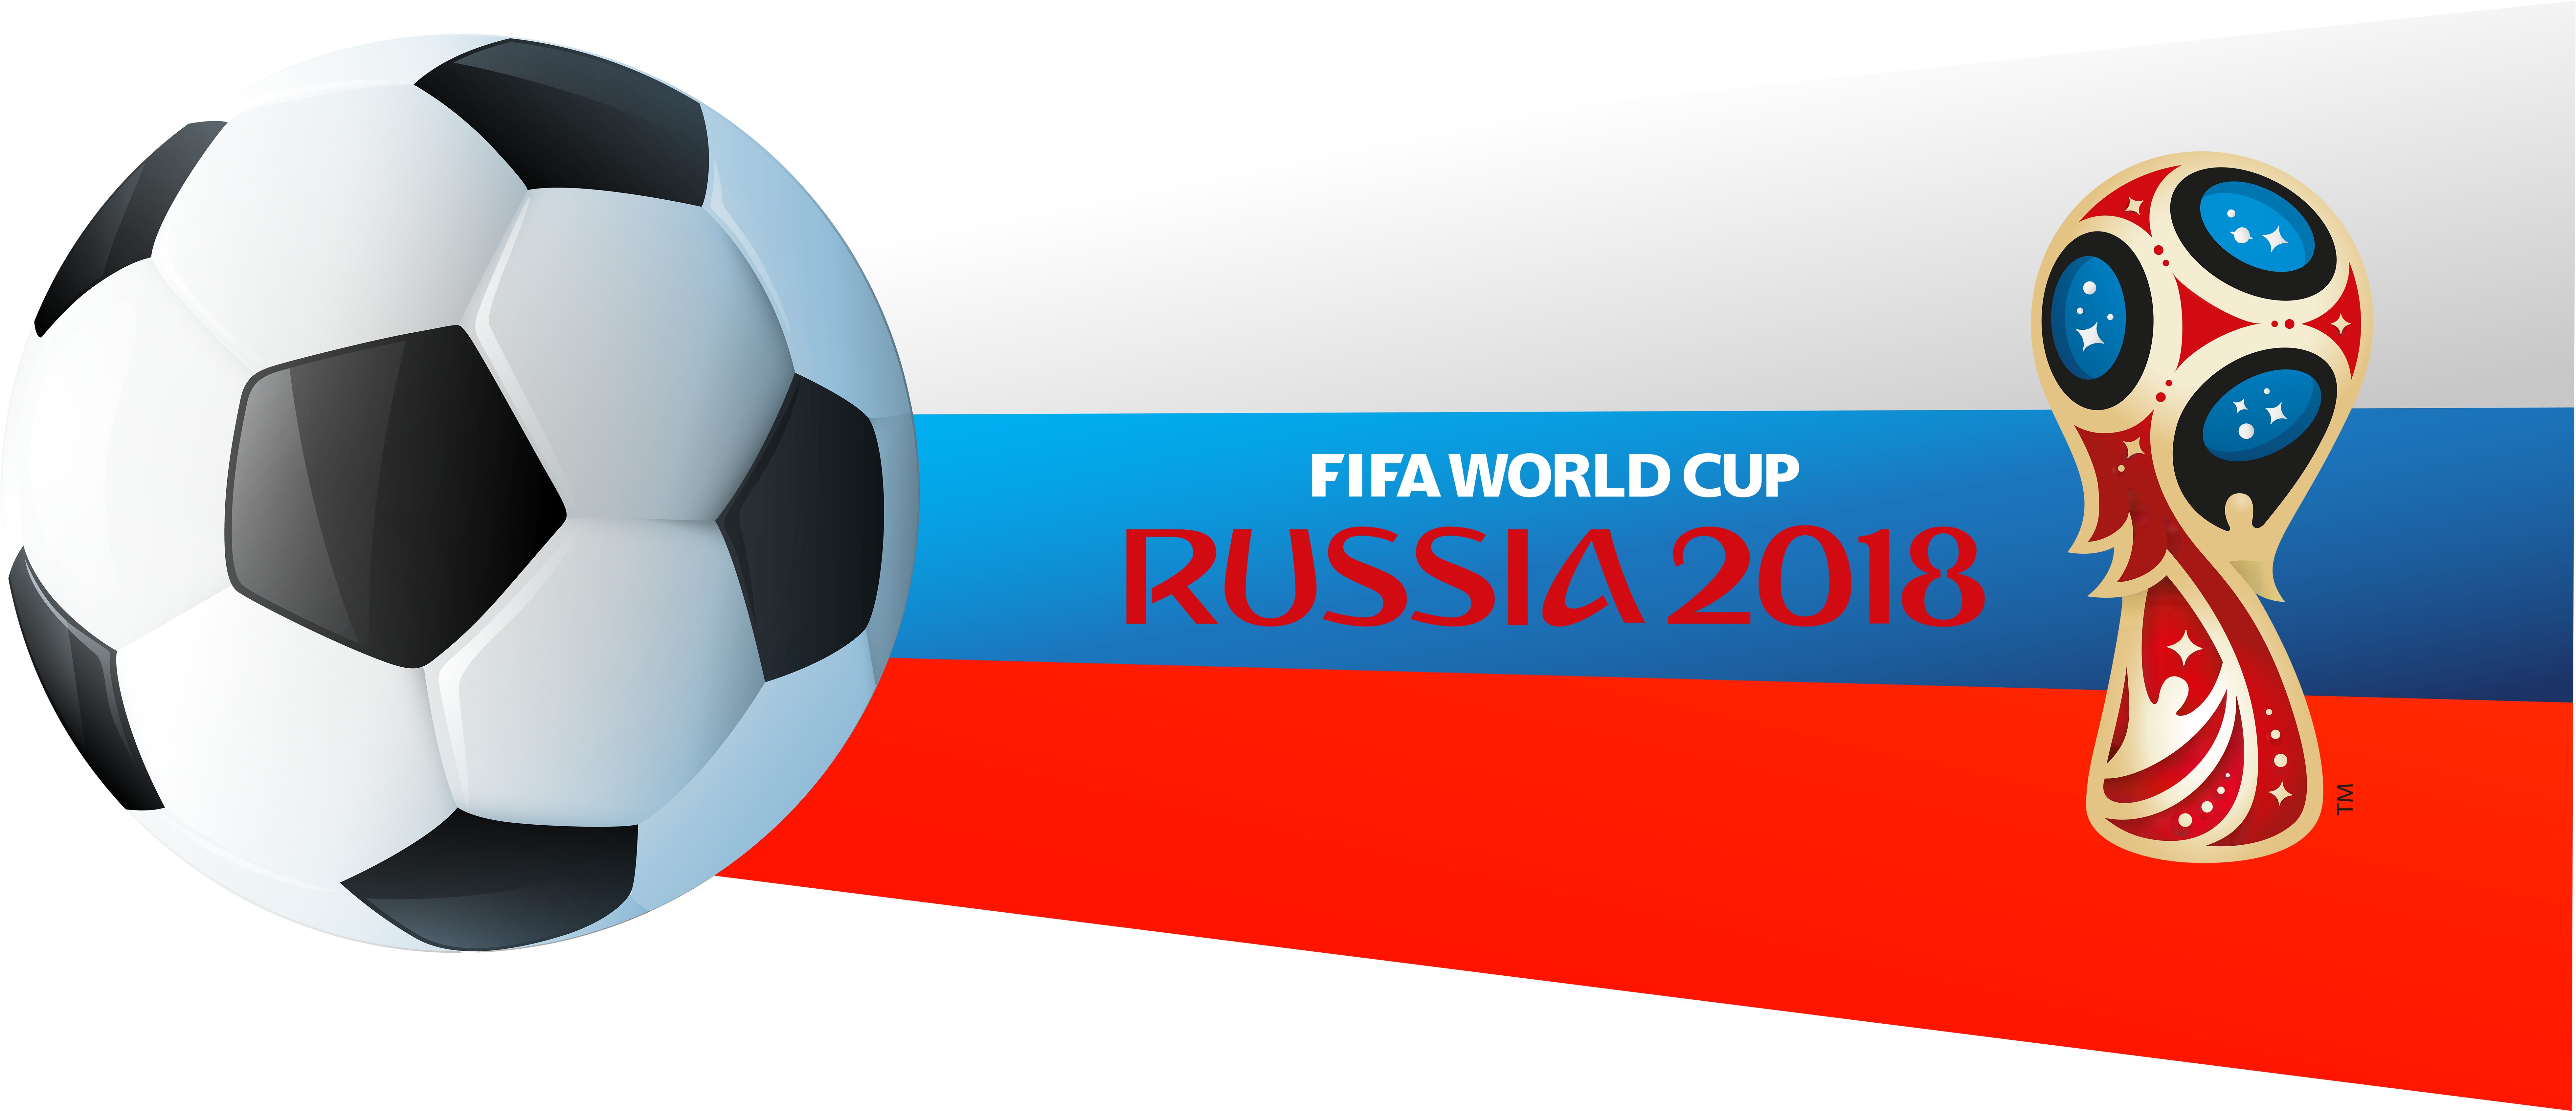 Soccer World Cup Qualification - 2018 Fifa World Cup (8000x3604)